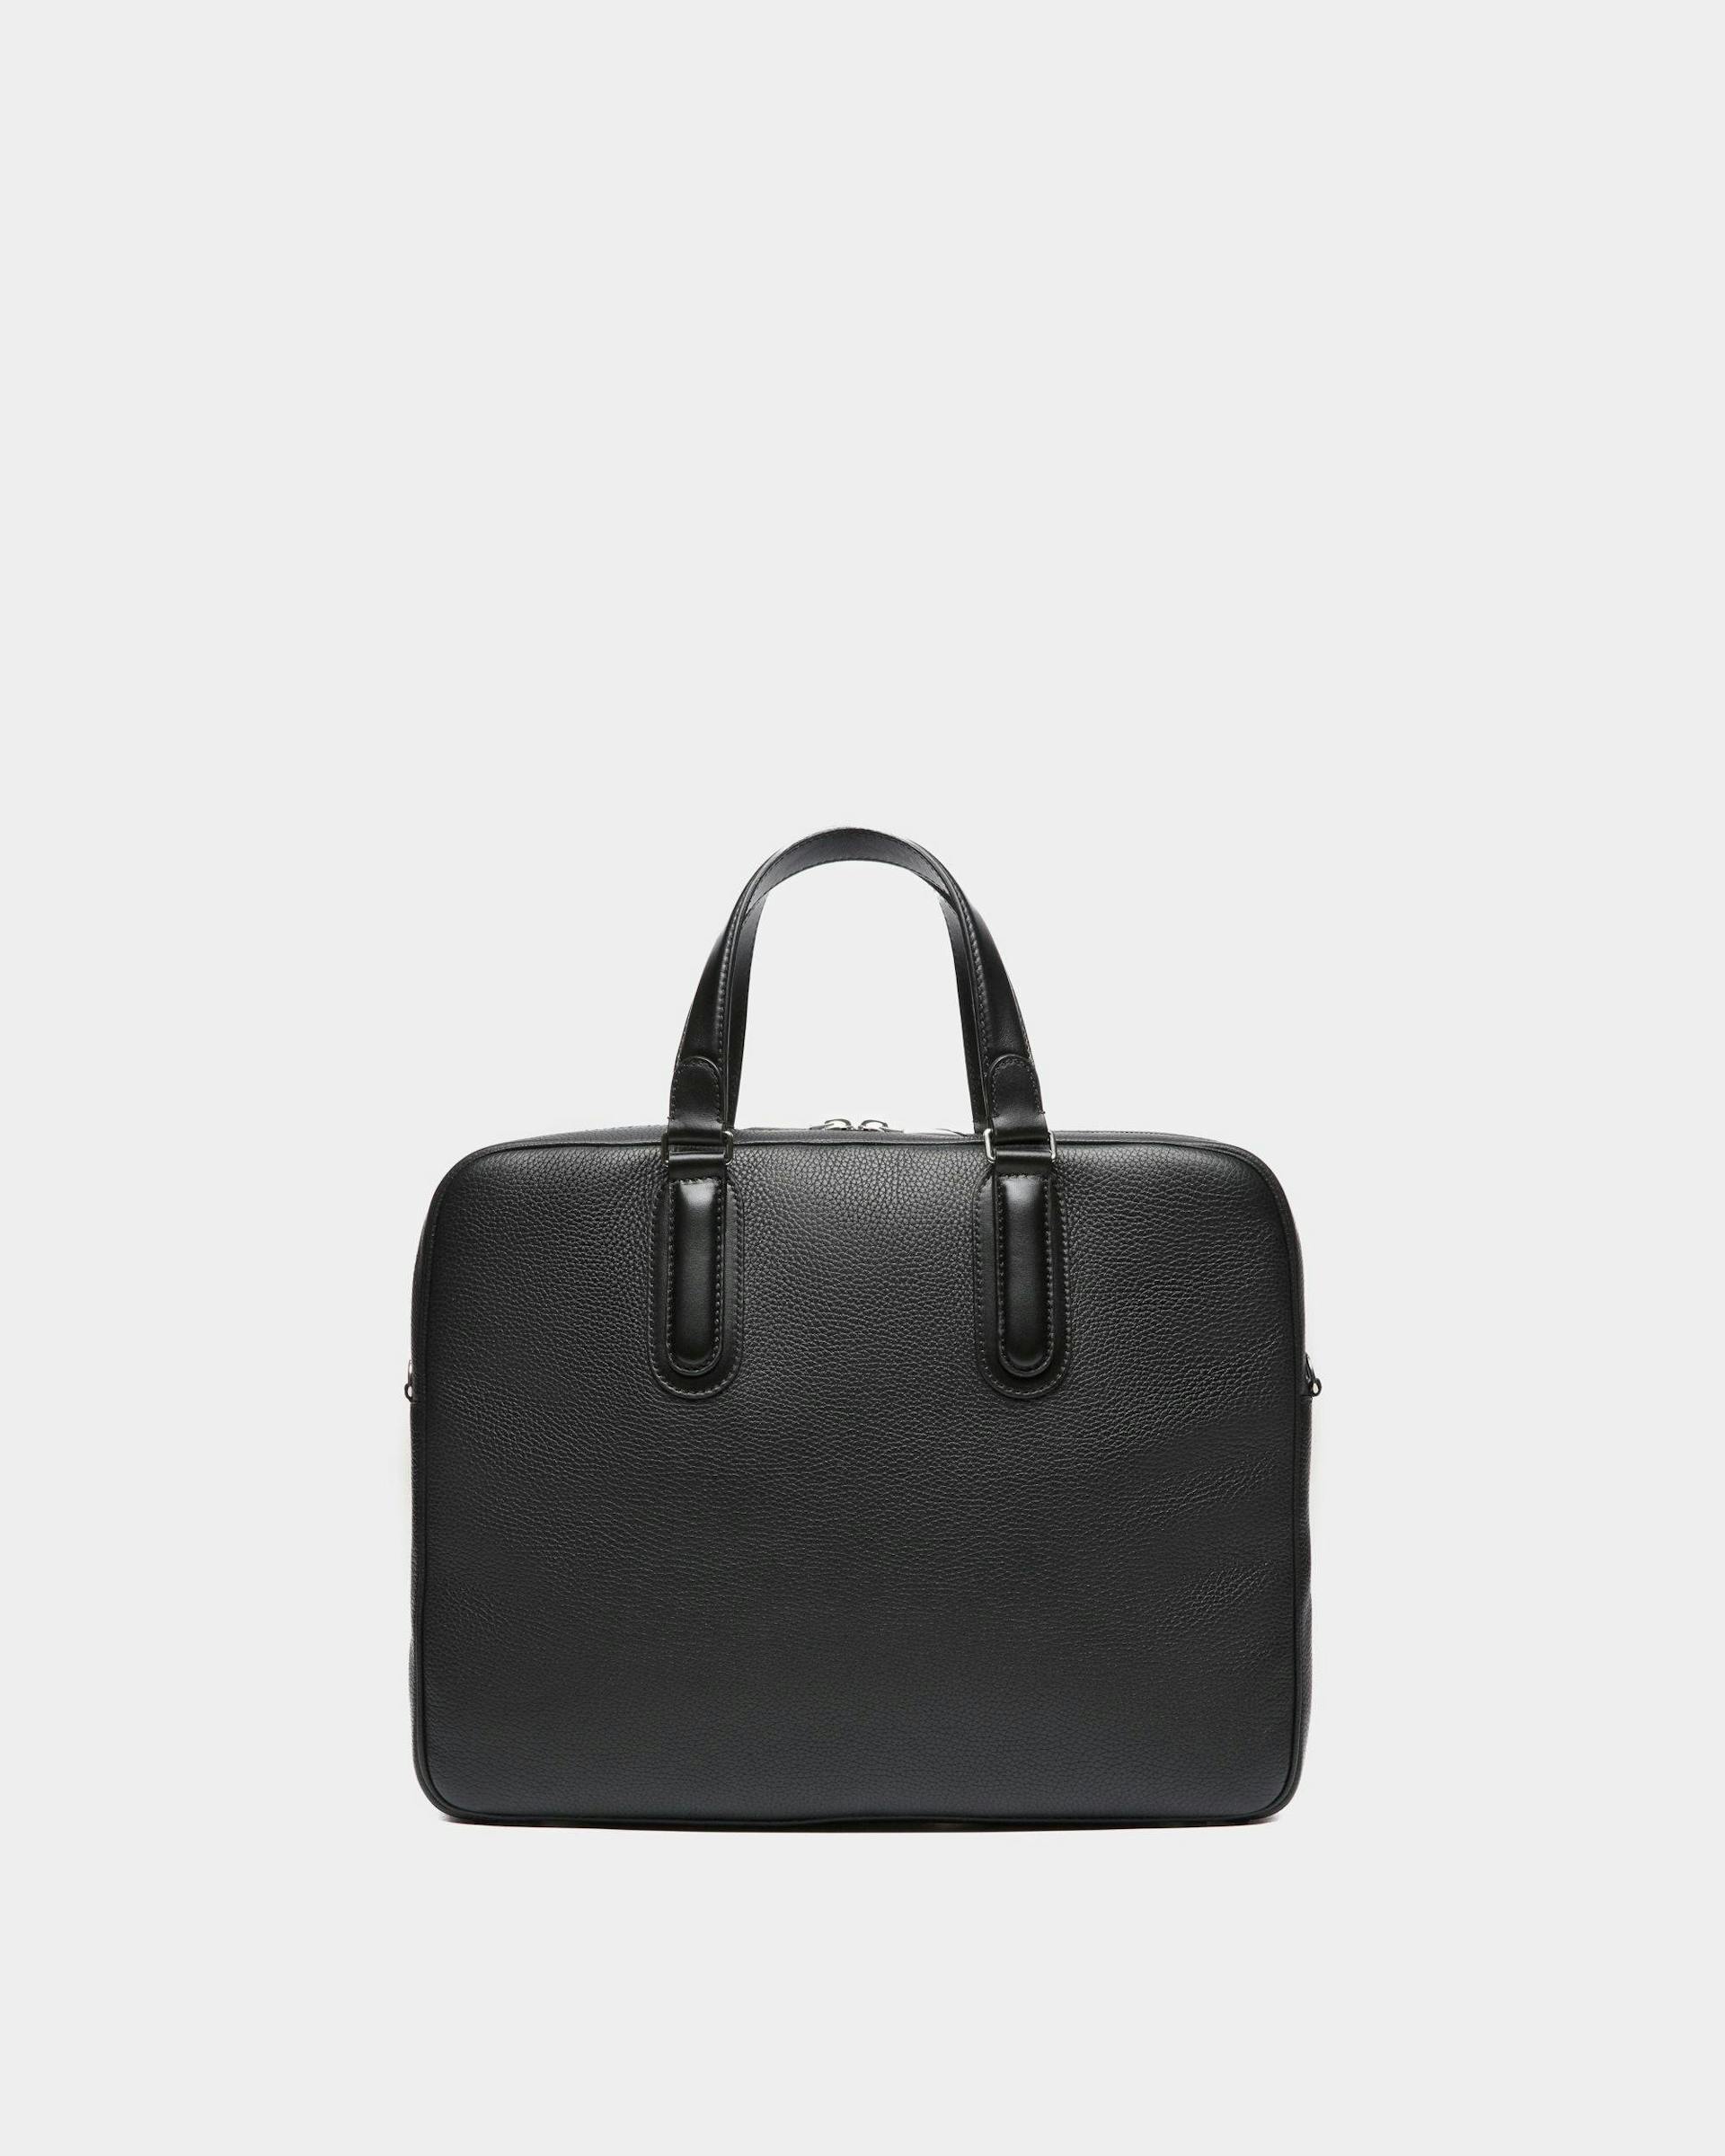 Men's Spin Briefcase In Black Grained Leather | Bally | Still Life Back